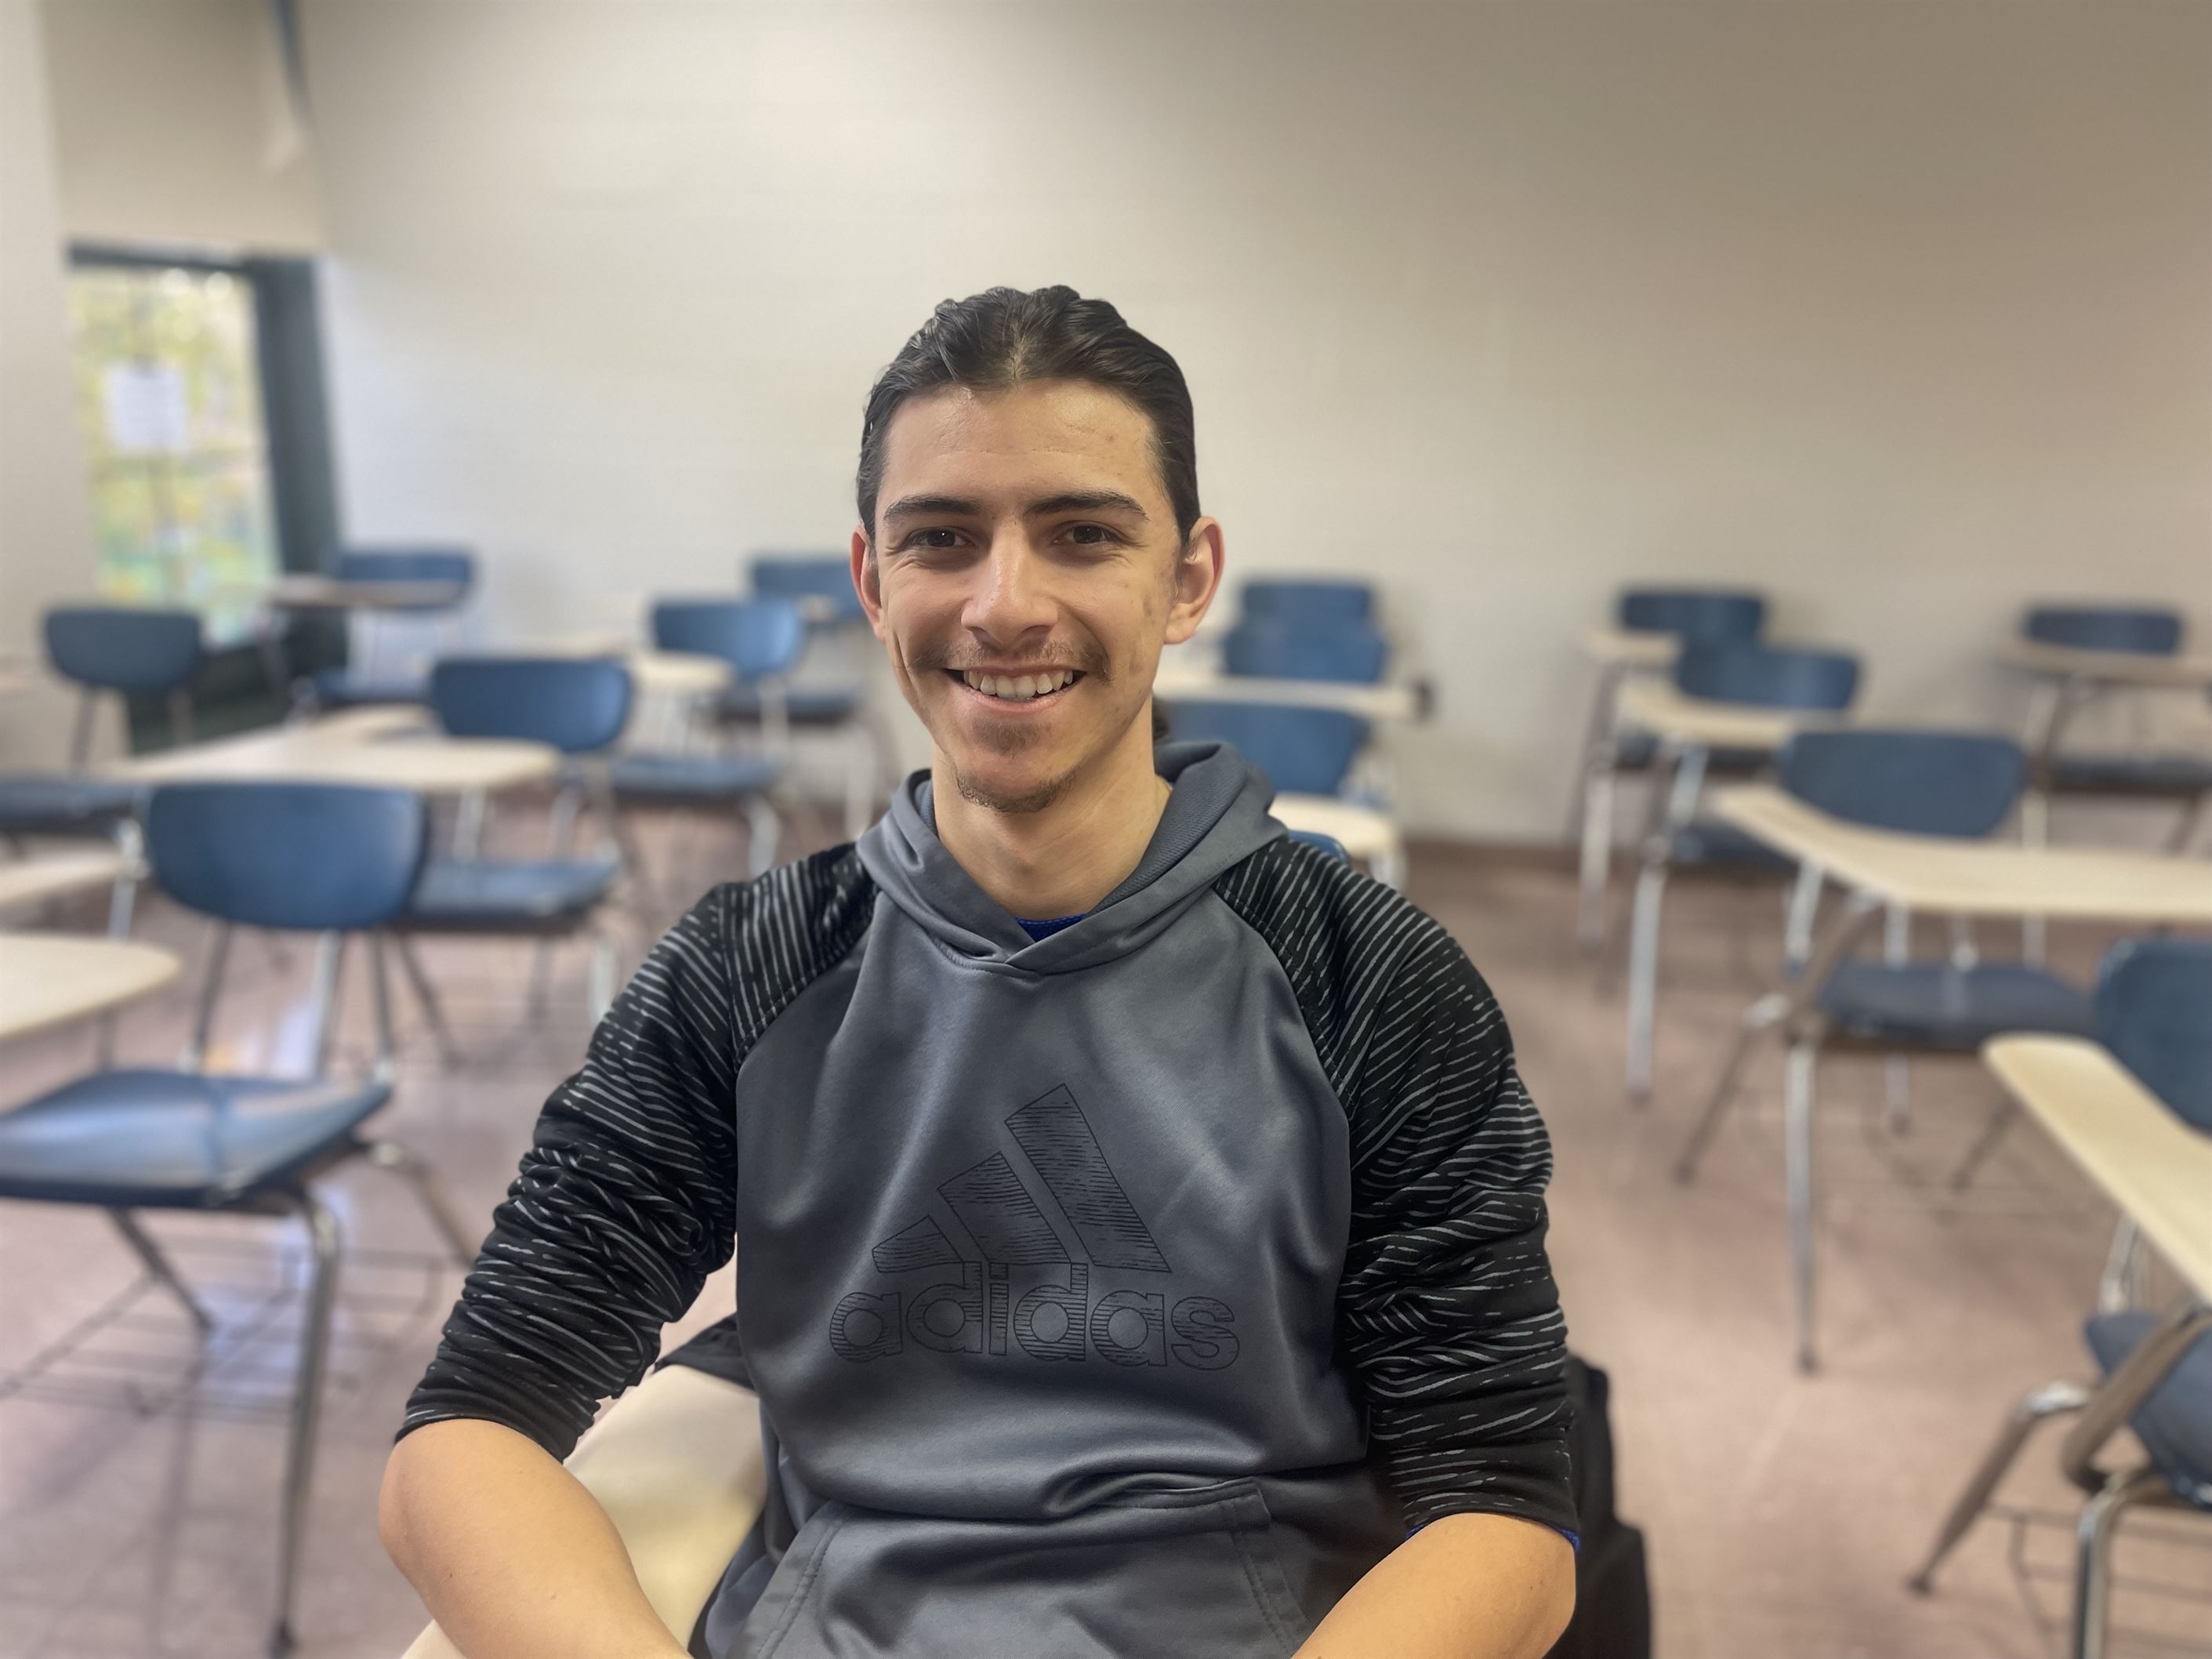 Thomas Ferman, a junior film and television major, says the university can do more to promote election days. 
Jennifer Portorreal | The Montclarion